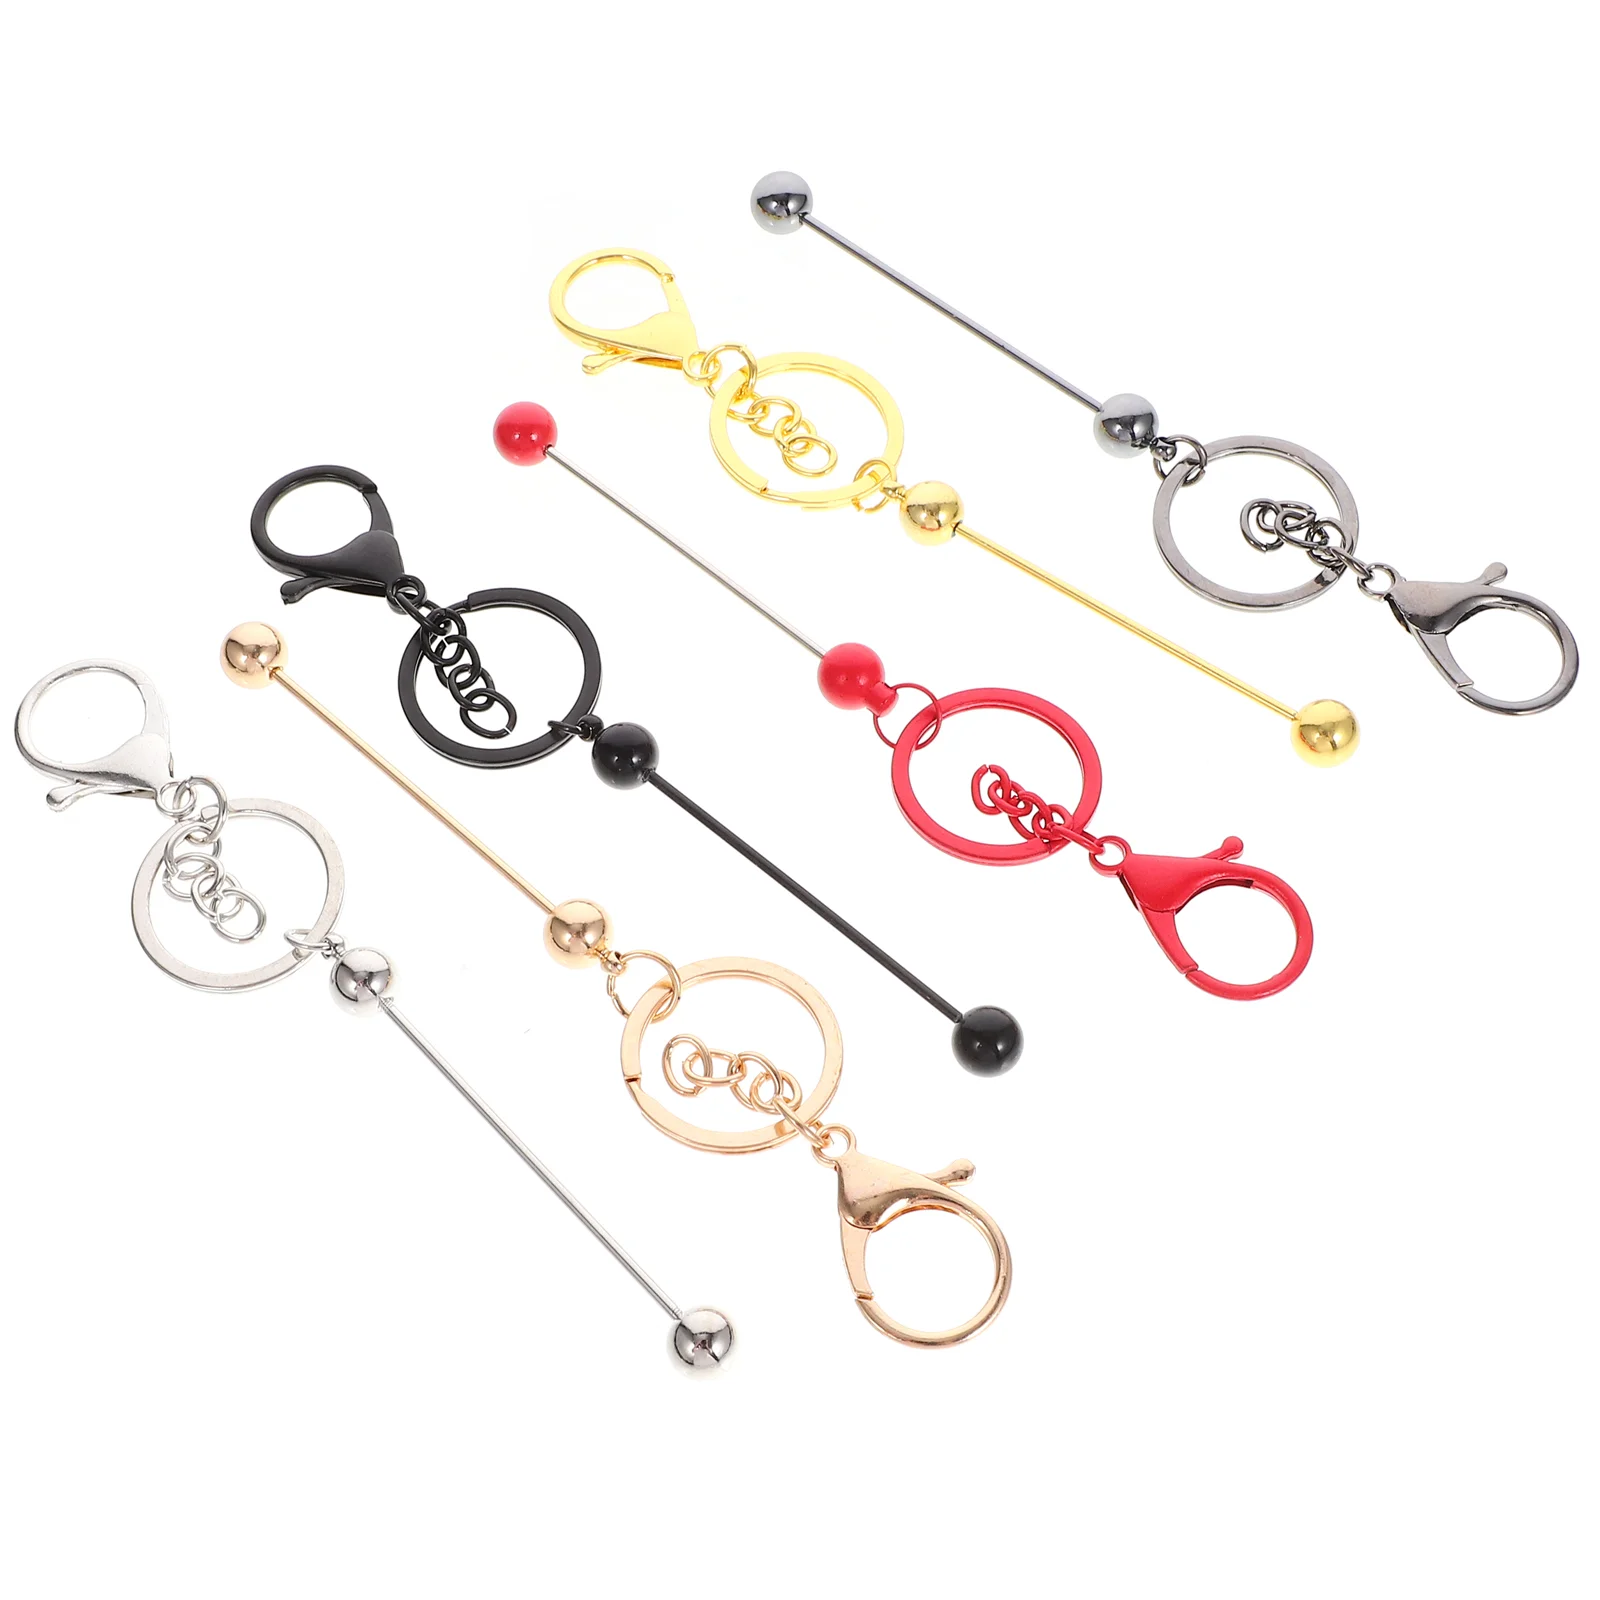 

6 Pcs Key Fob Beaded Bar Chain Ring Beadable Metal Crafting Keychain Reusable Portable Delicate Keychains